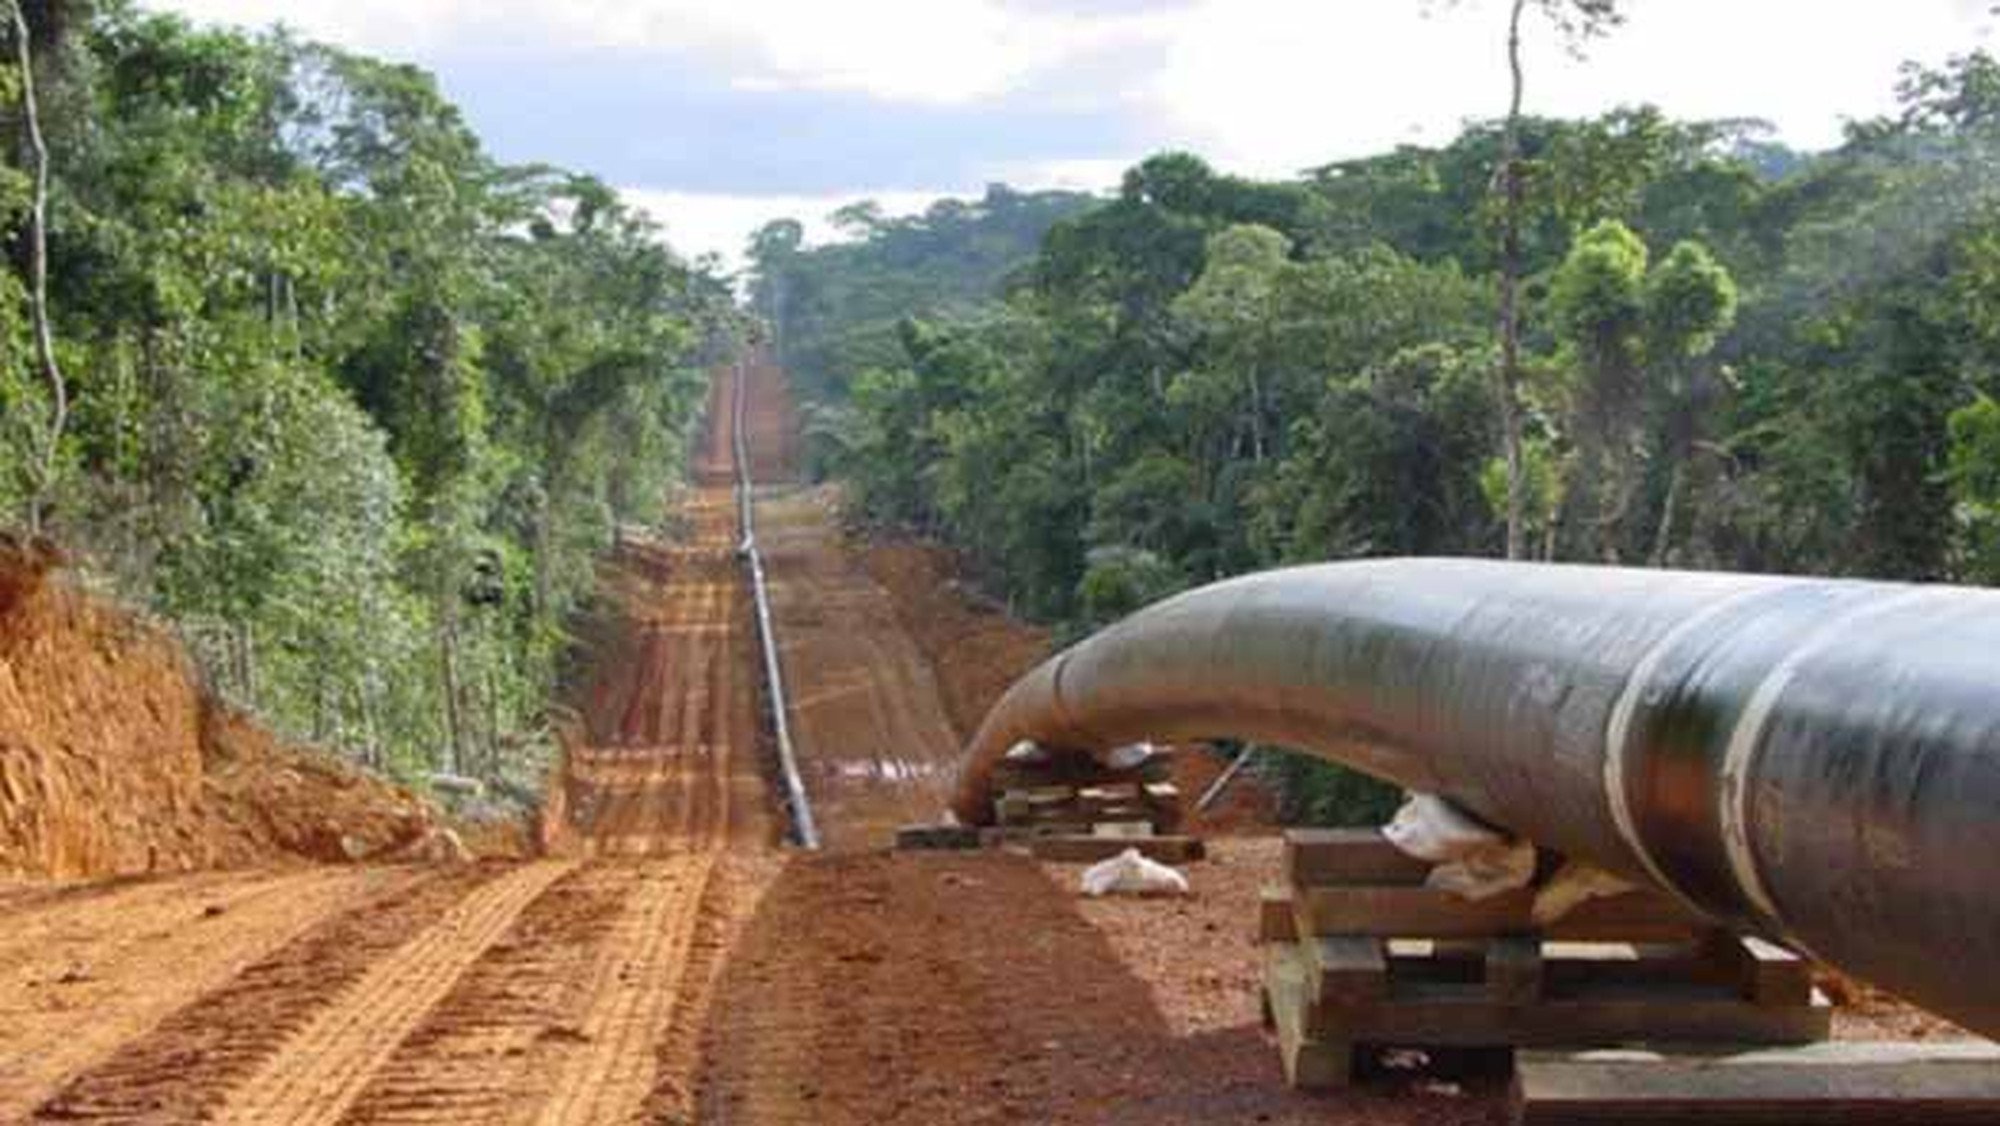 When completed, the East African Crude Oil Pipeline will carry oil from Uganda to a port in Tanzania. Photo: Handout